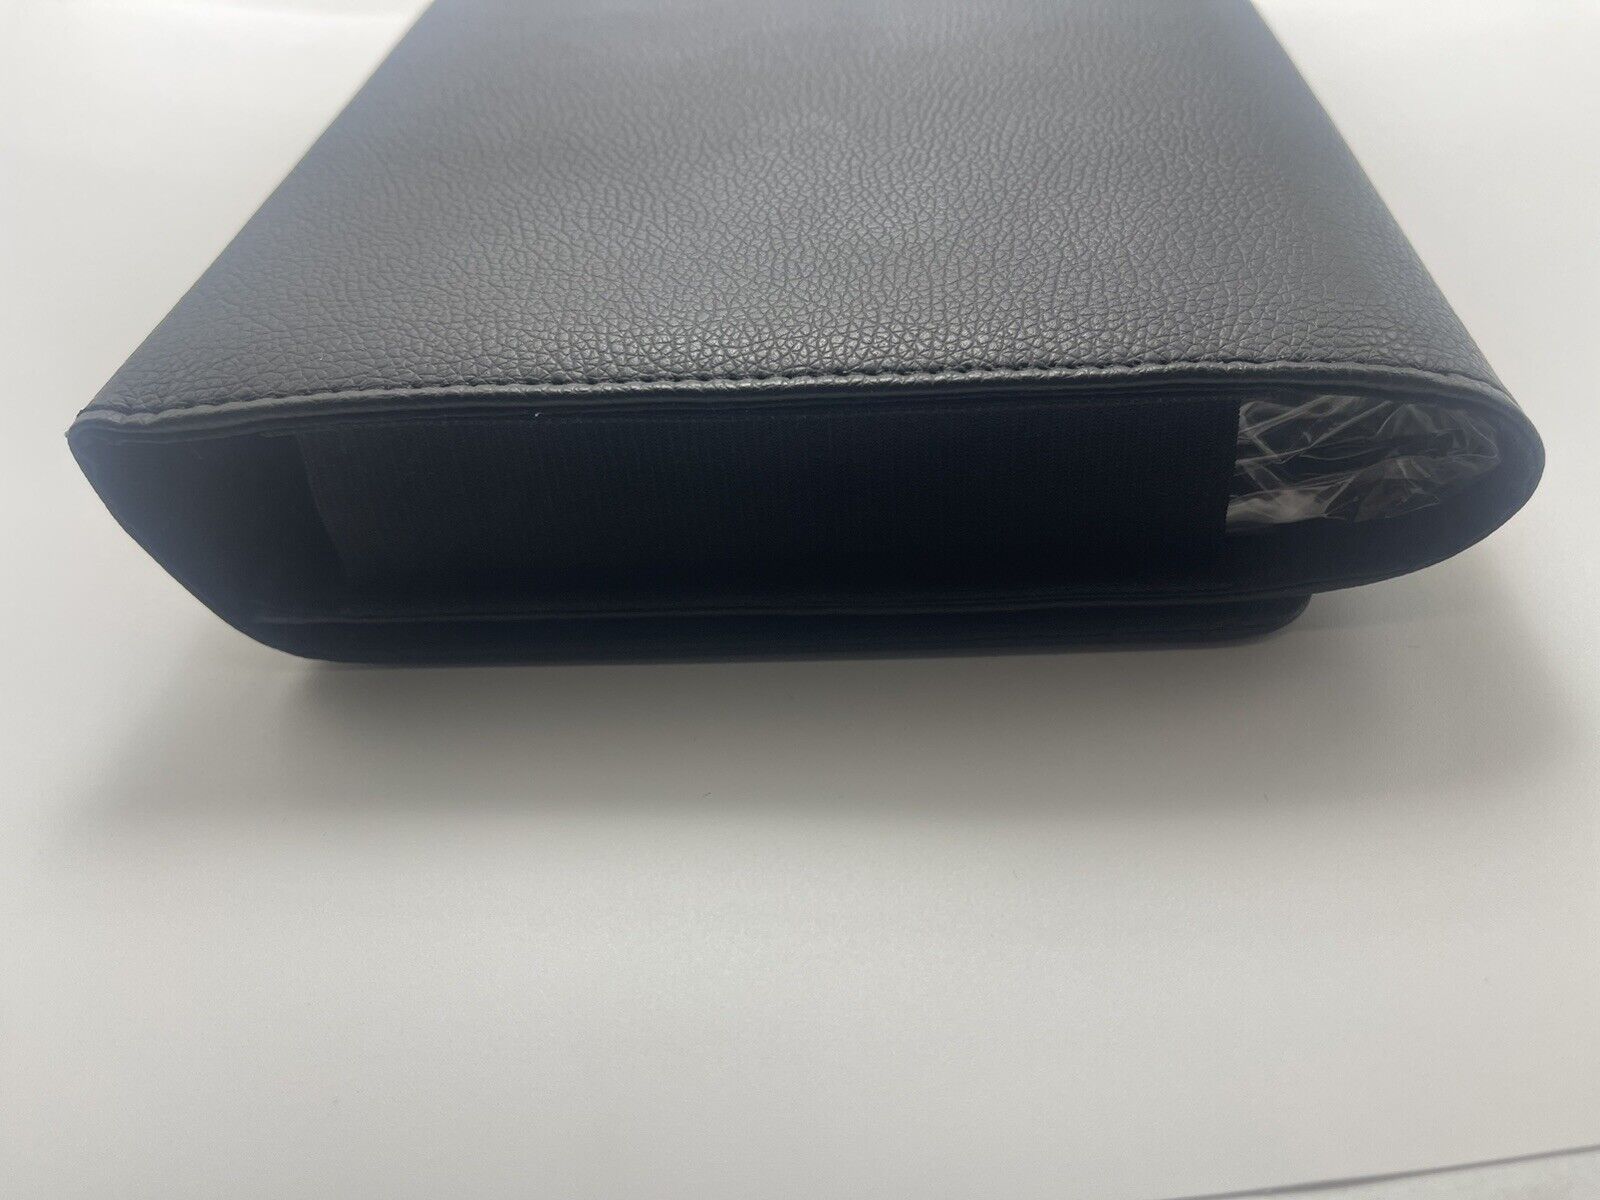 Infiniti Owner's Manual Leather Case Bag Paperwork Storage Pouch